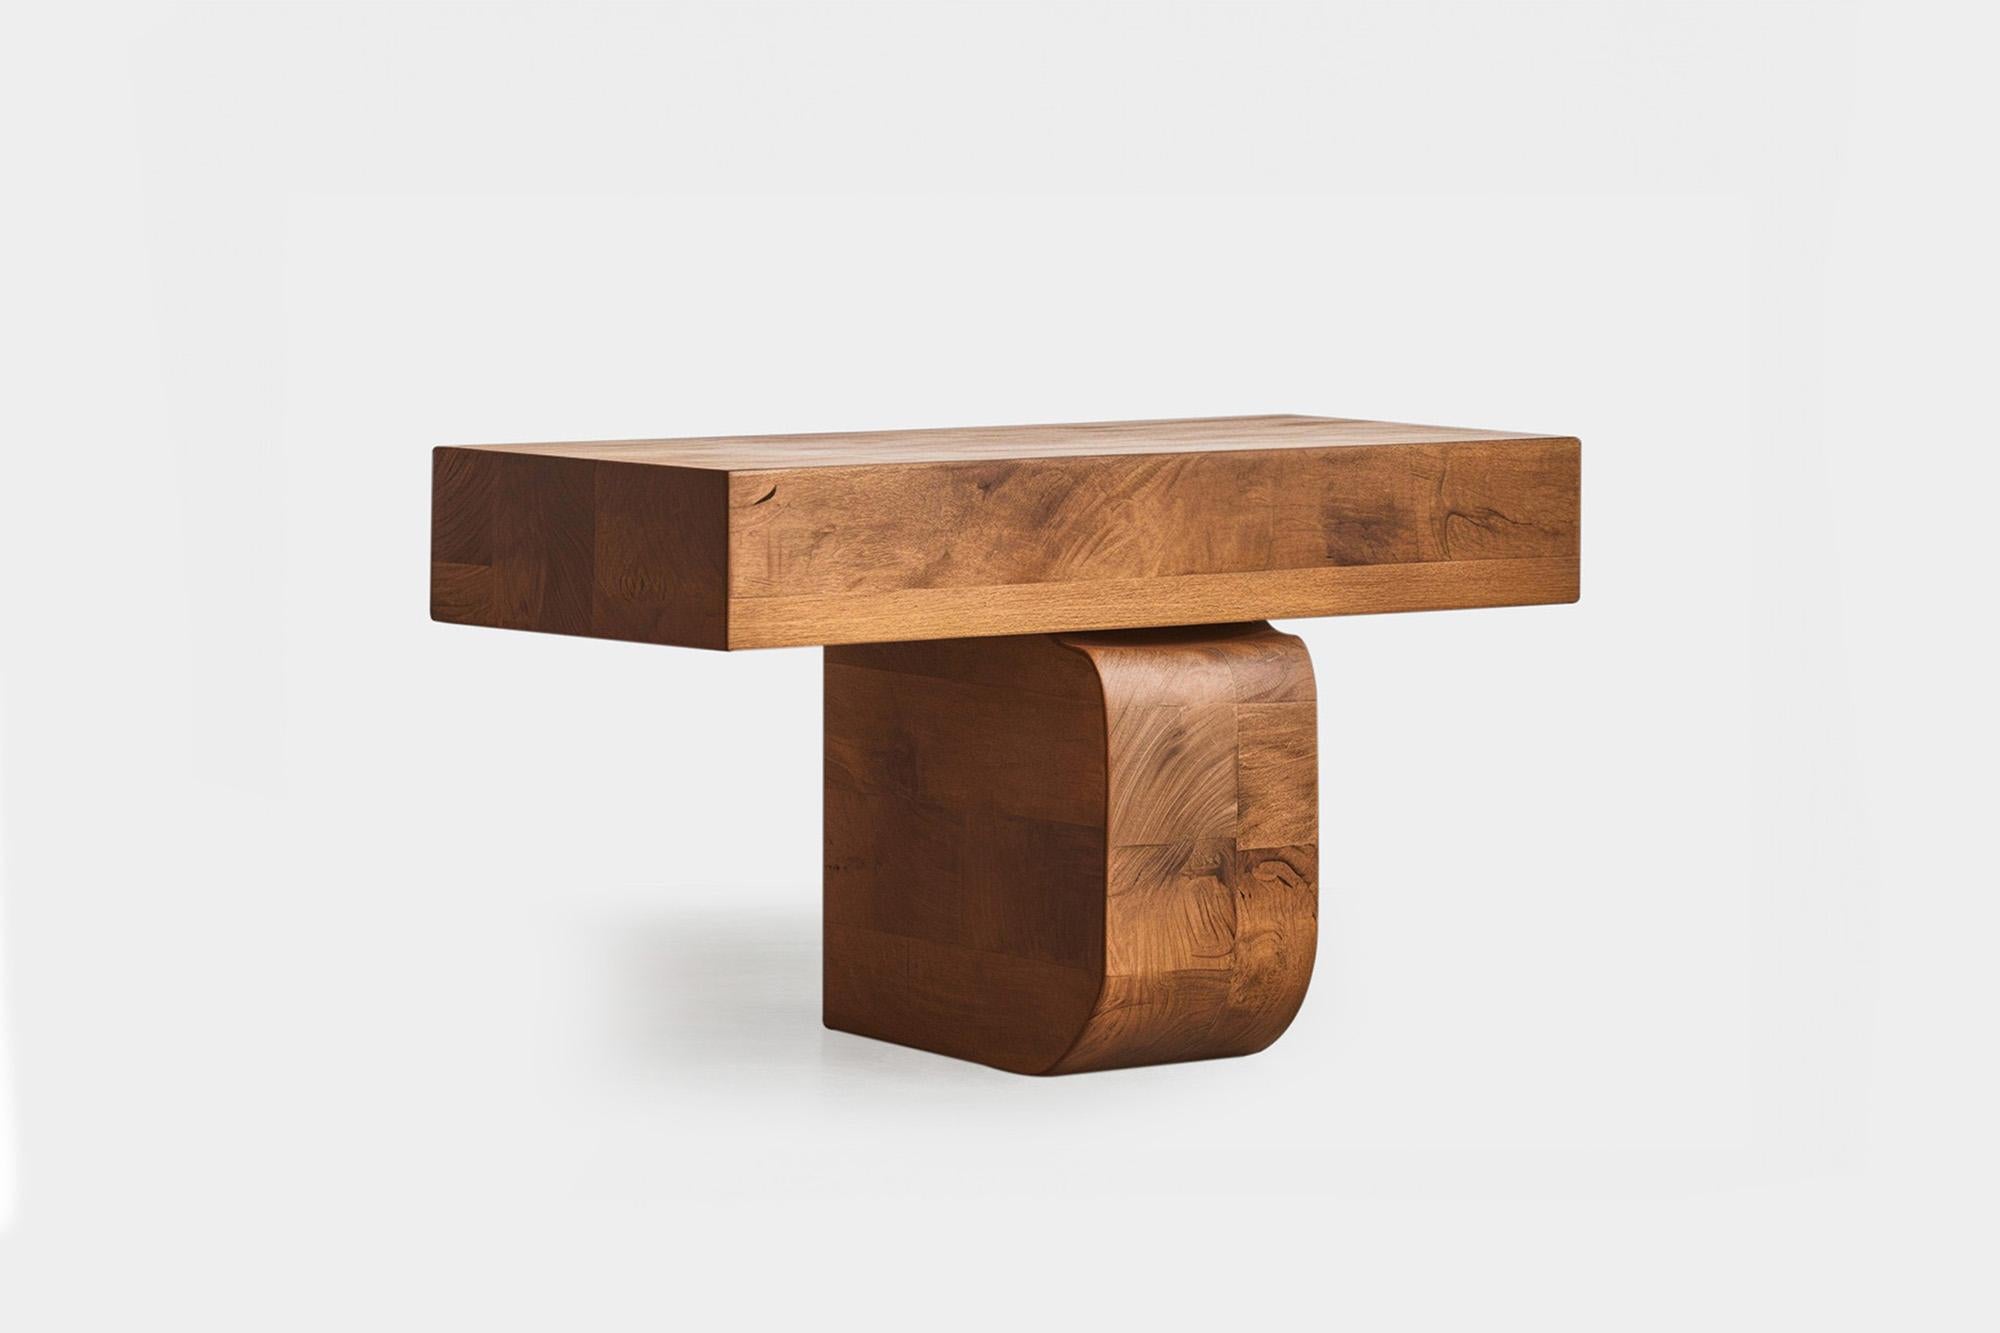 Elefante by NONO Desk 04, Oak Precision, Functional Art
—————————————————————
Elefante Collection: A Harmony of Design and Heritage by NONO

Crafting Elegance with a Modernist Touch

NONO, renowned for its decade-long journey in redefining everyday